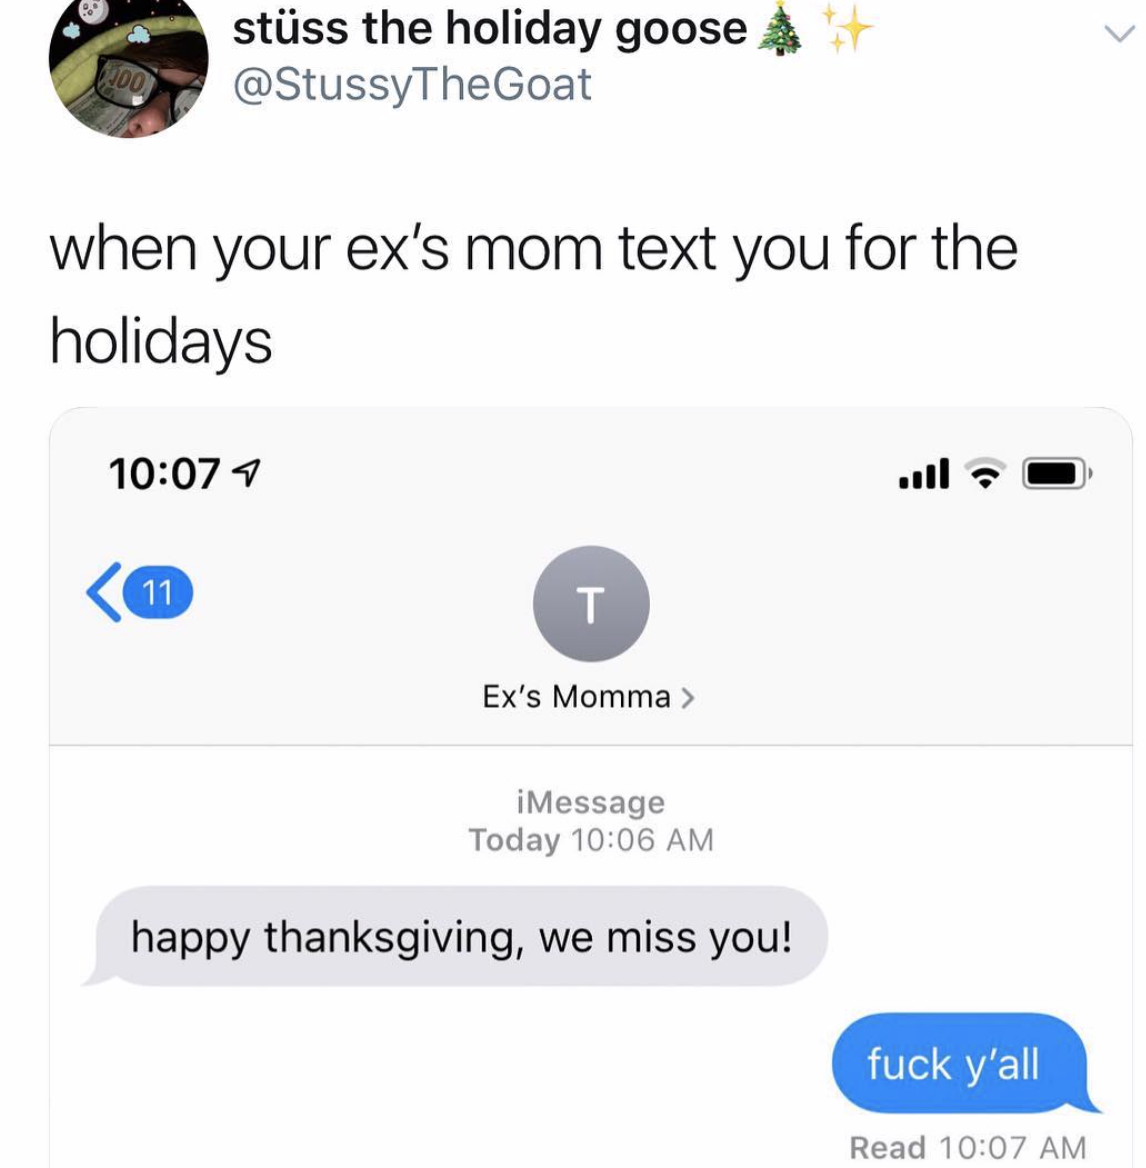 web page - stss the holiday goose A when your ex's mom text you for the holidays